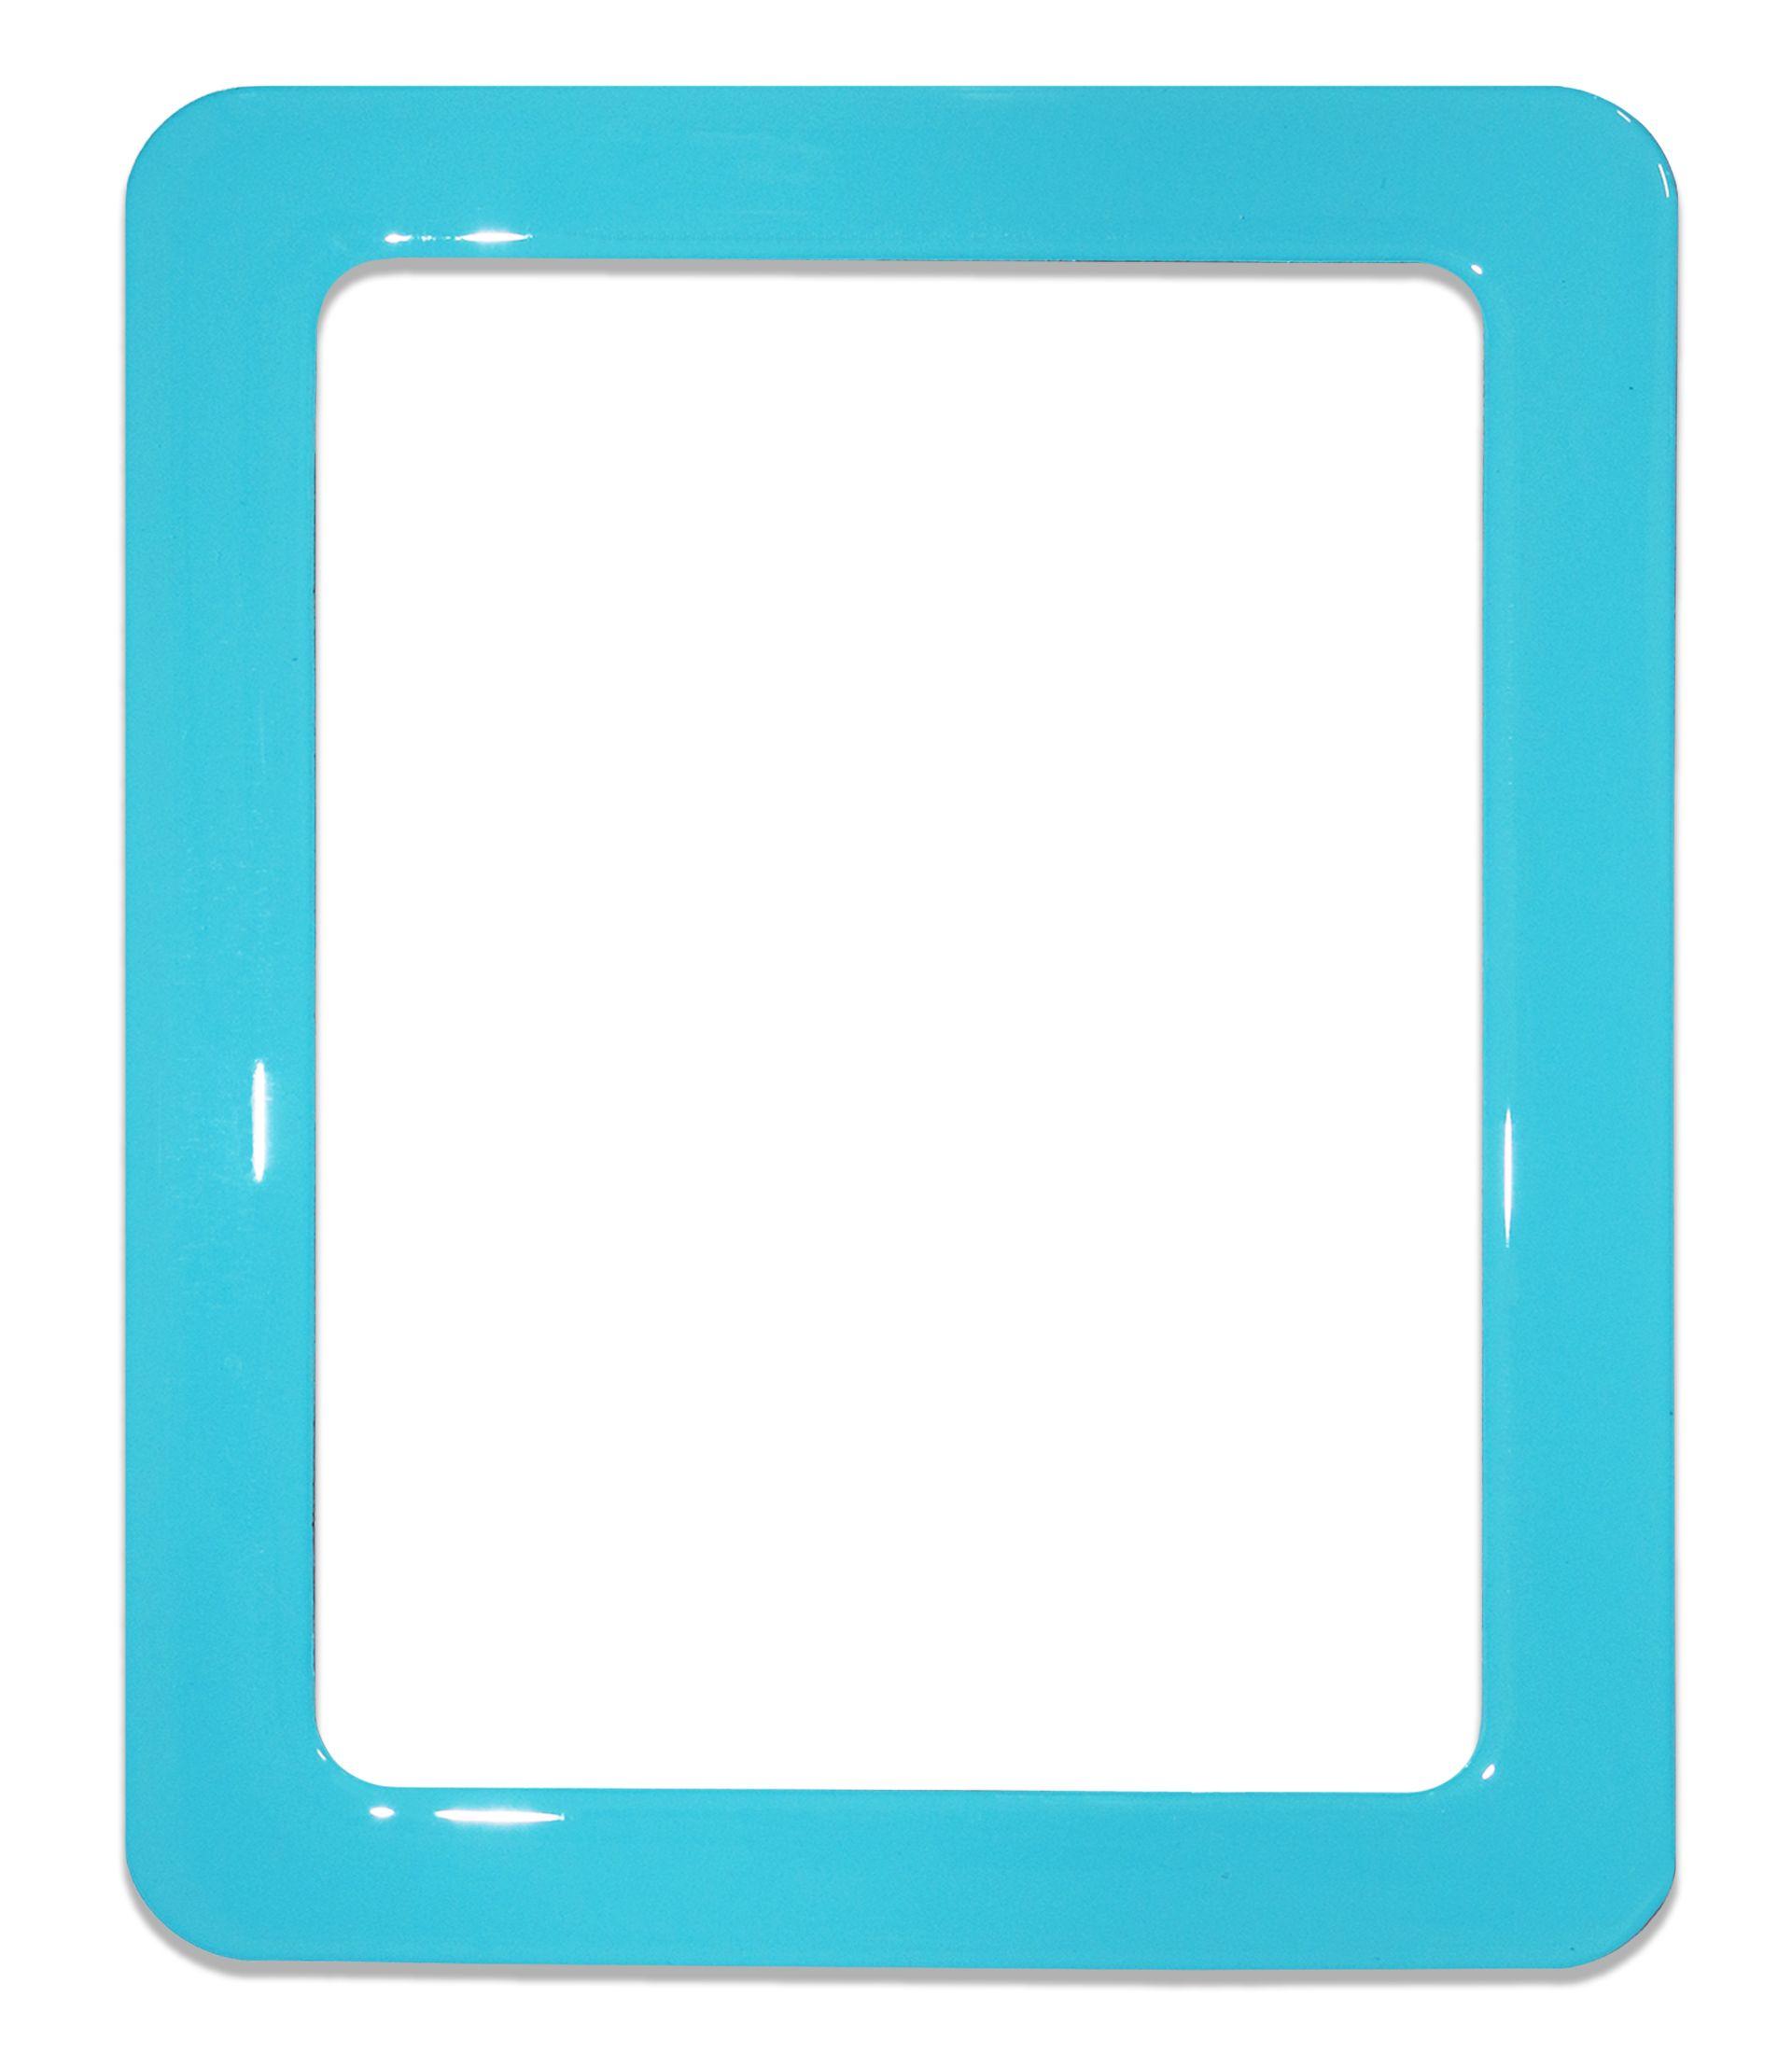 Magnetic self-adhesive frame size 19.0 x 23.8 cm - light blue